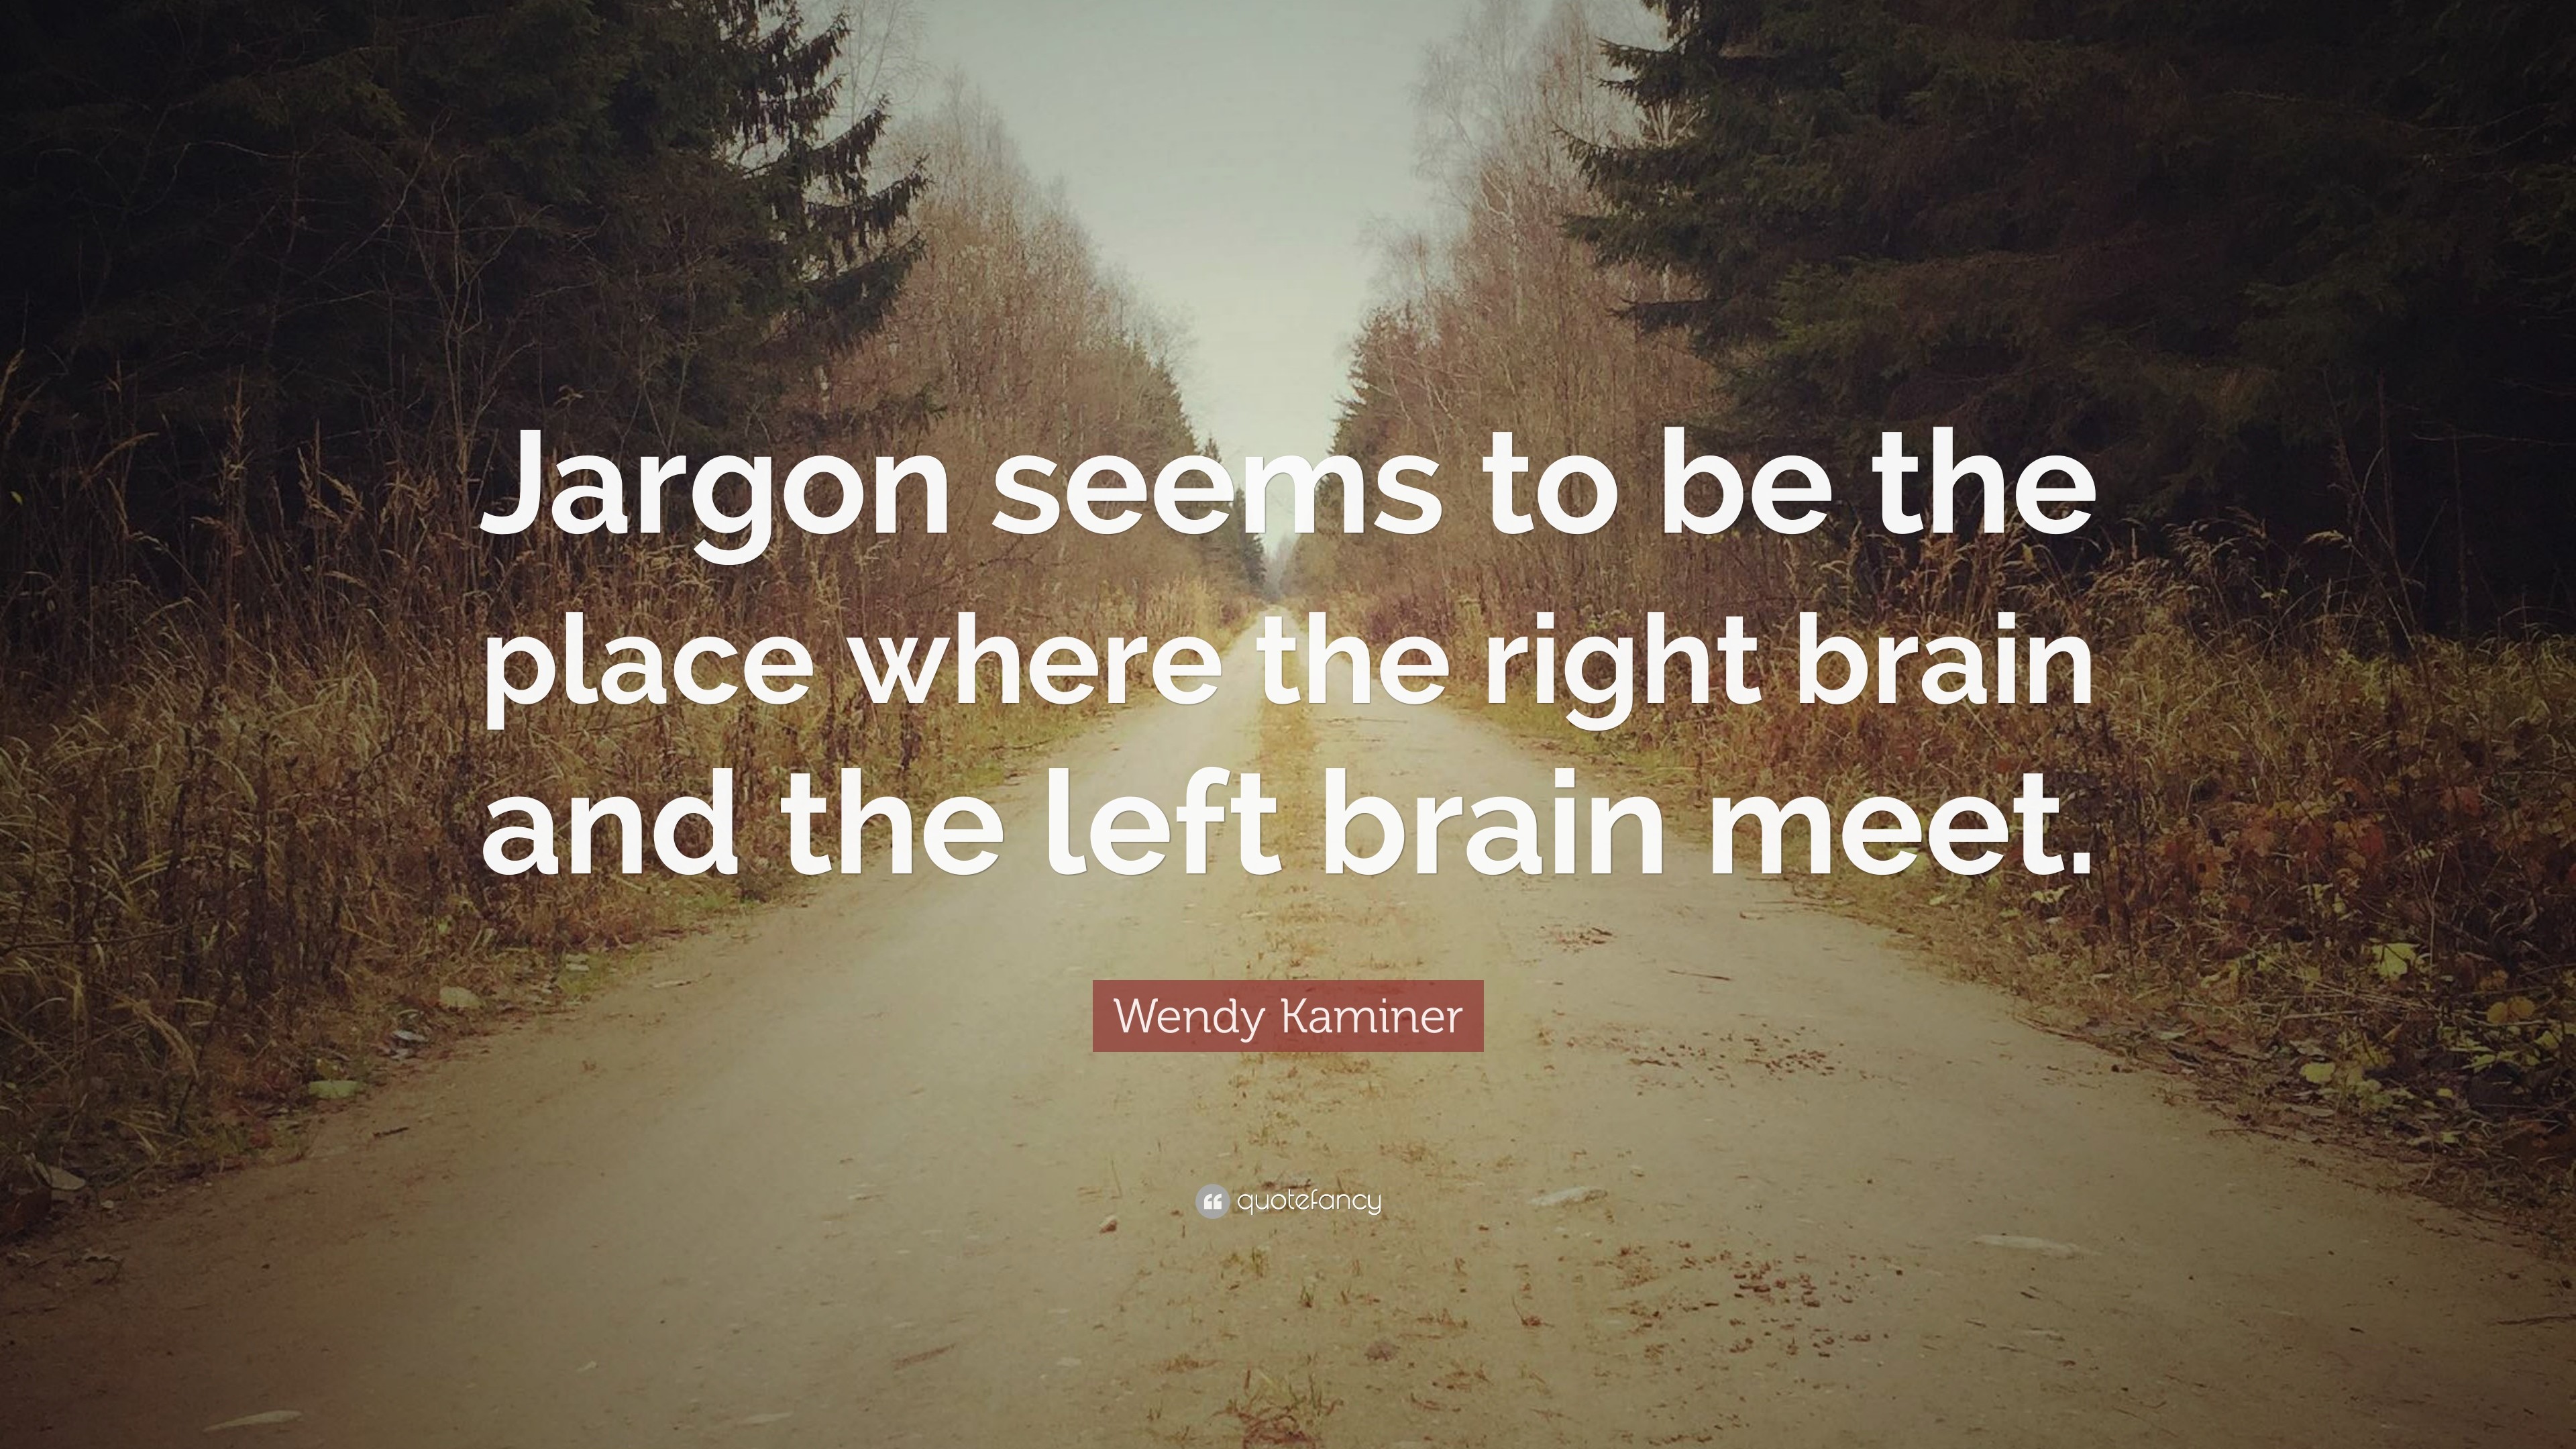 3840x2160 Wendy Kaminer Quote: “Jargon seems to be the place where the right brain and